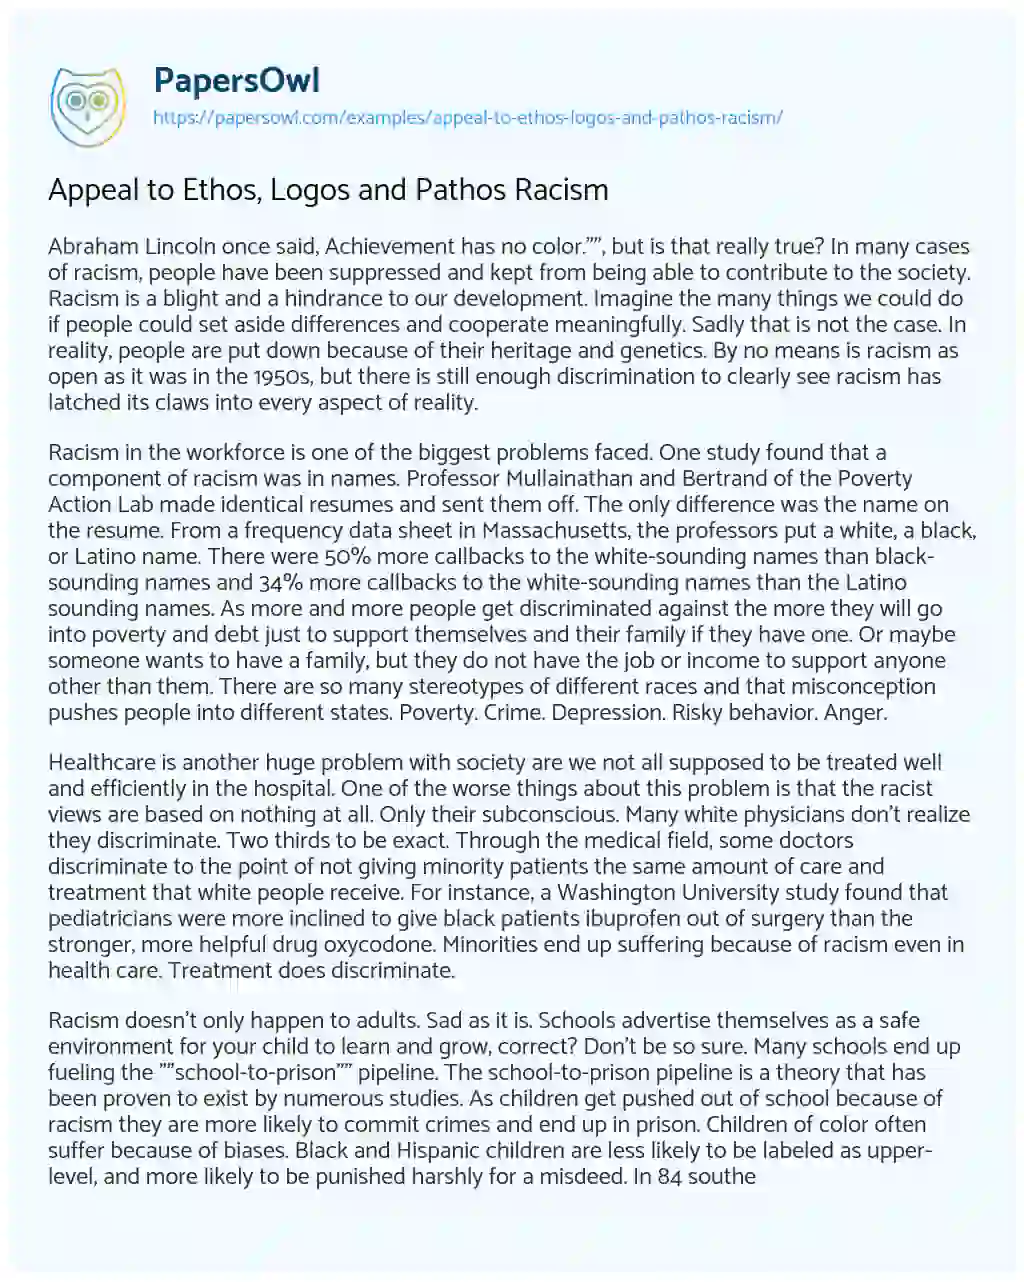 Essay on Appeal to Ethos, Logos and Pathos Racism